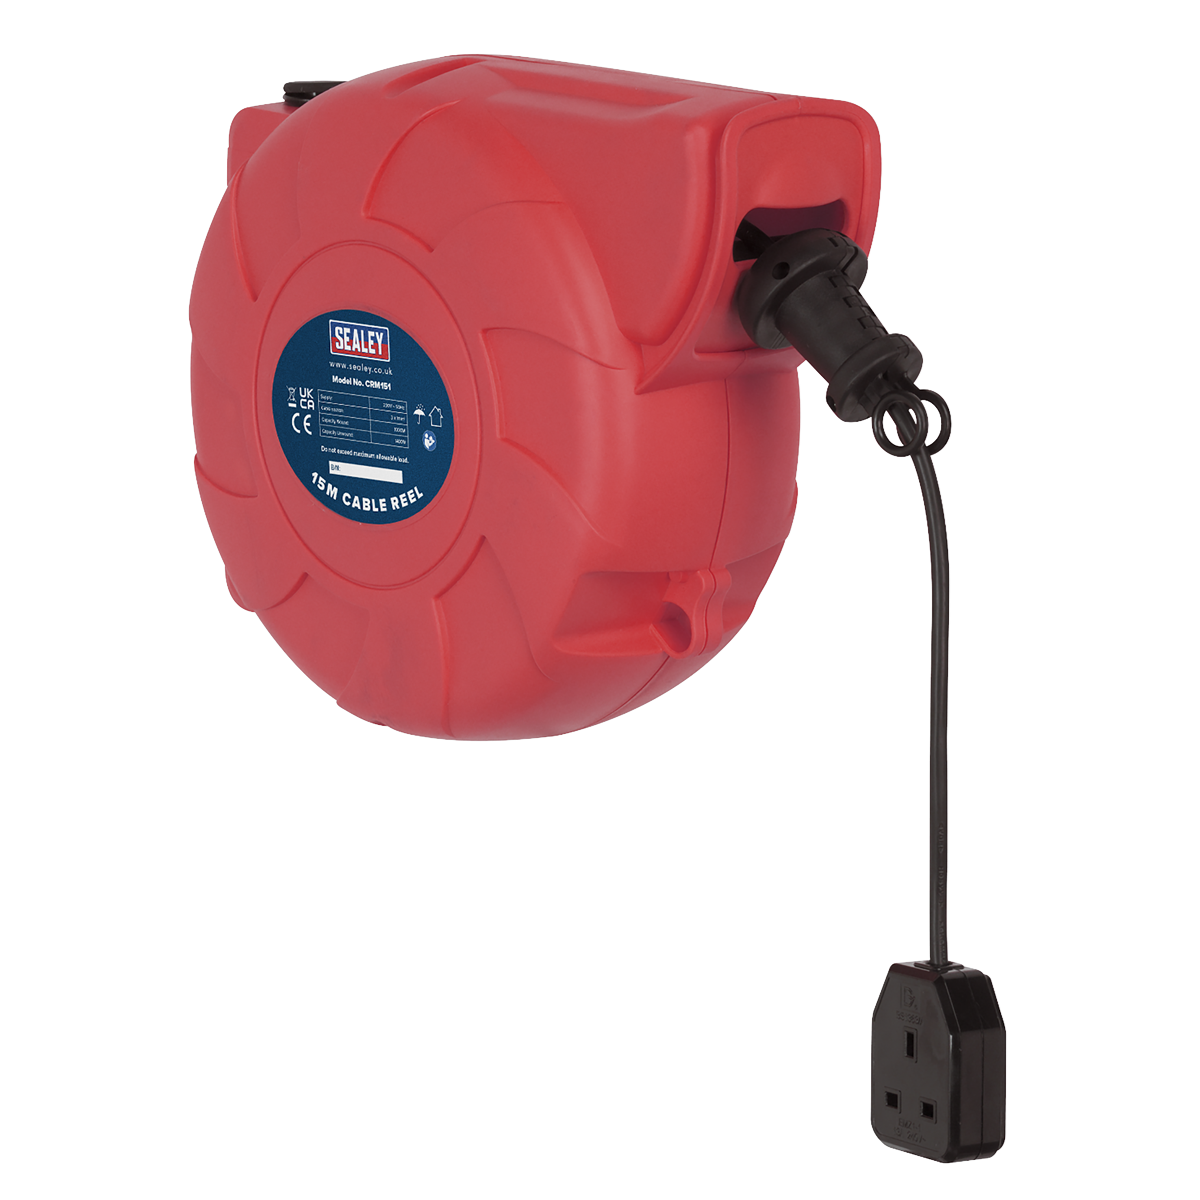 US PRO 2300 15 Meter Wall Mounted Extension Cable Reel 240V